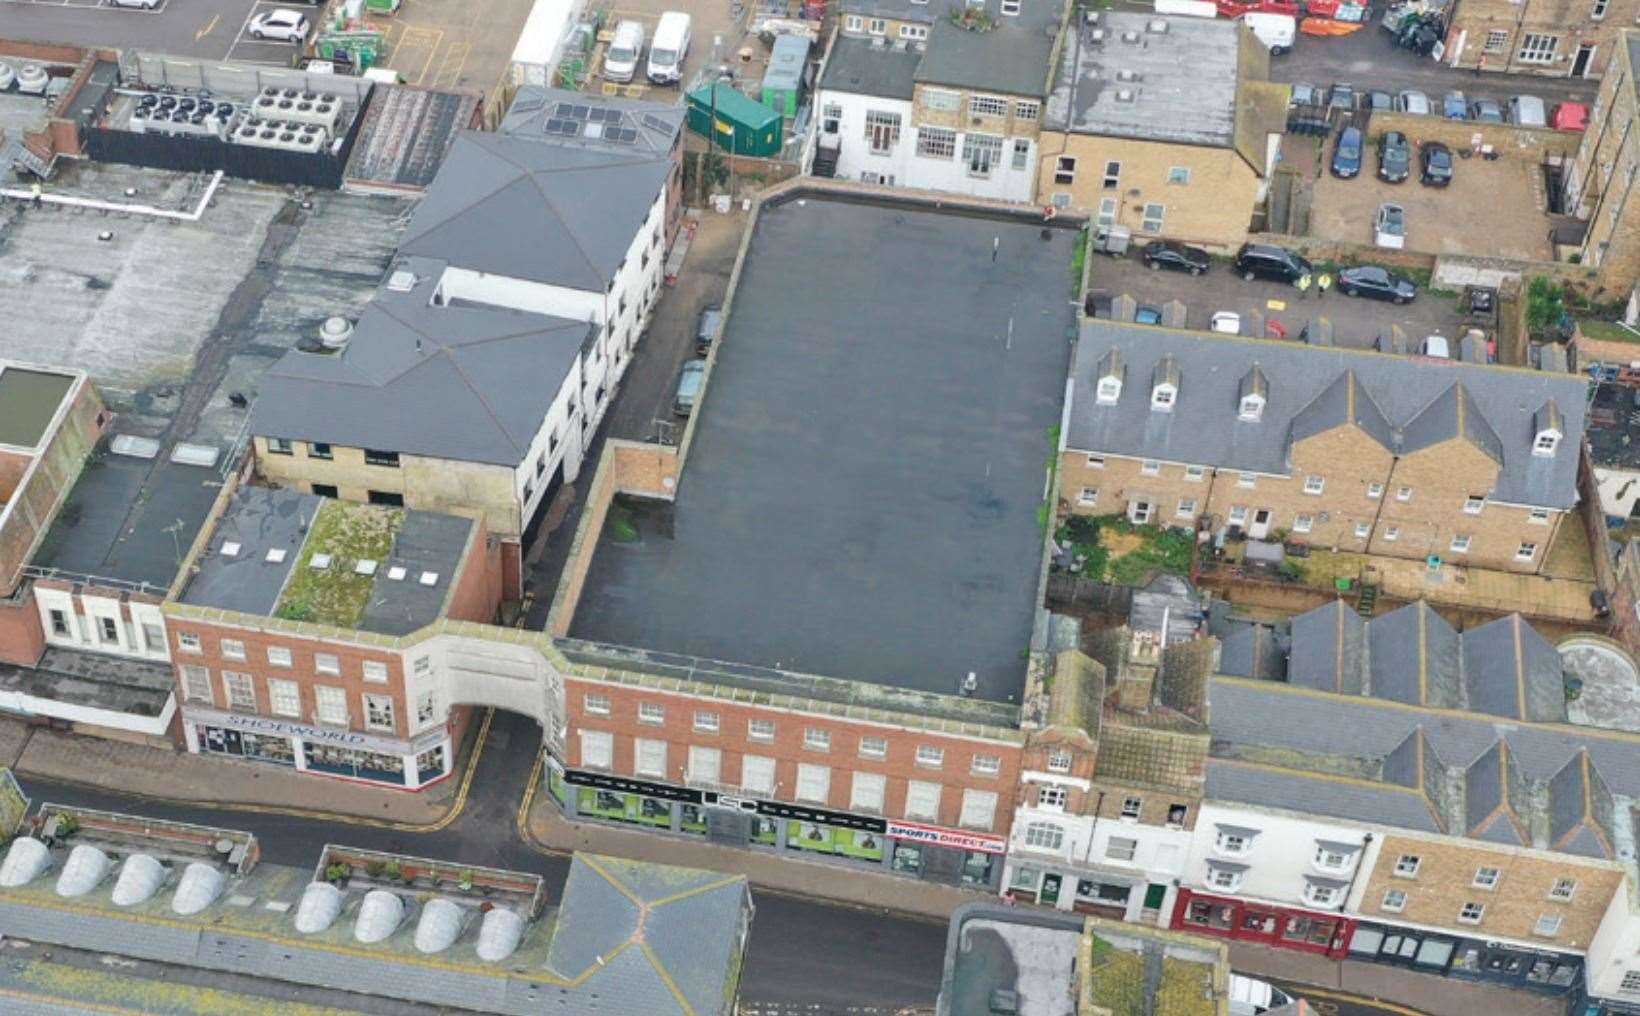 An aerial view of the Ramsgate site